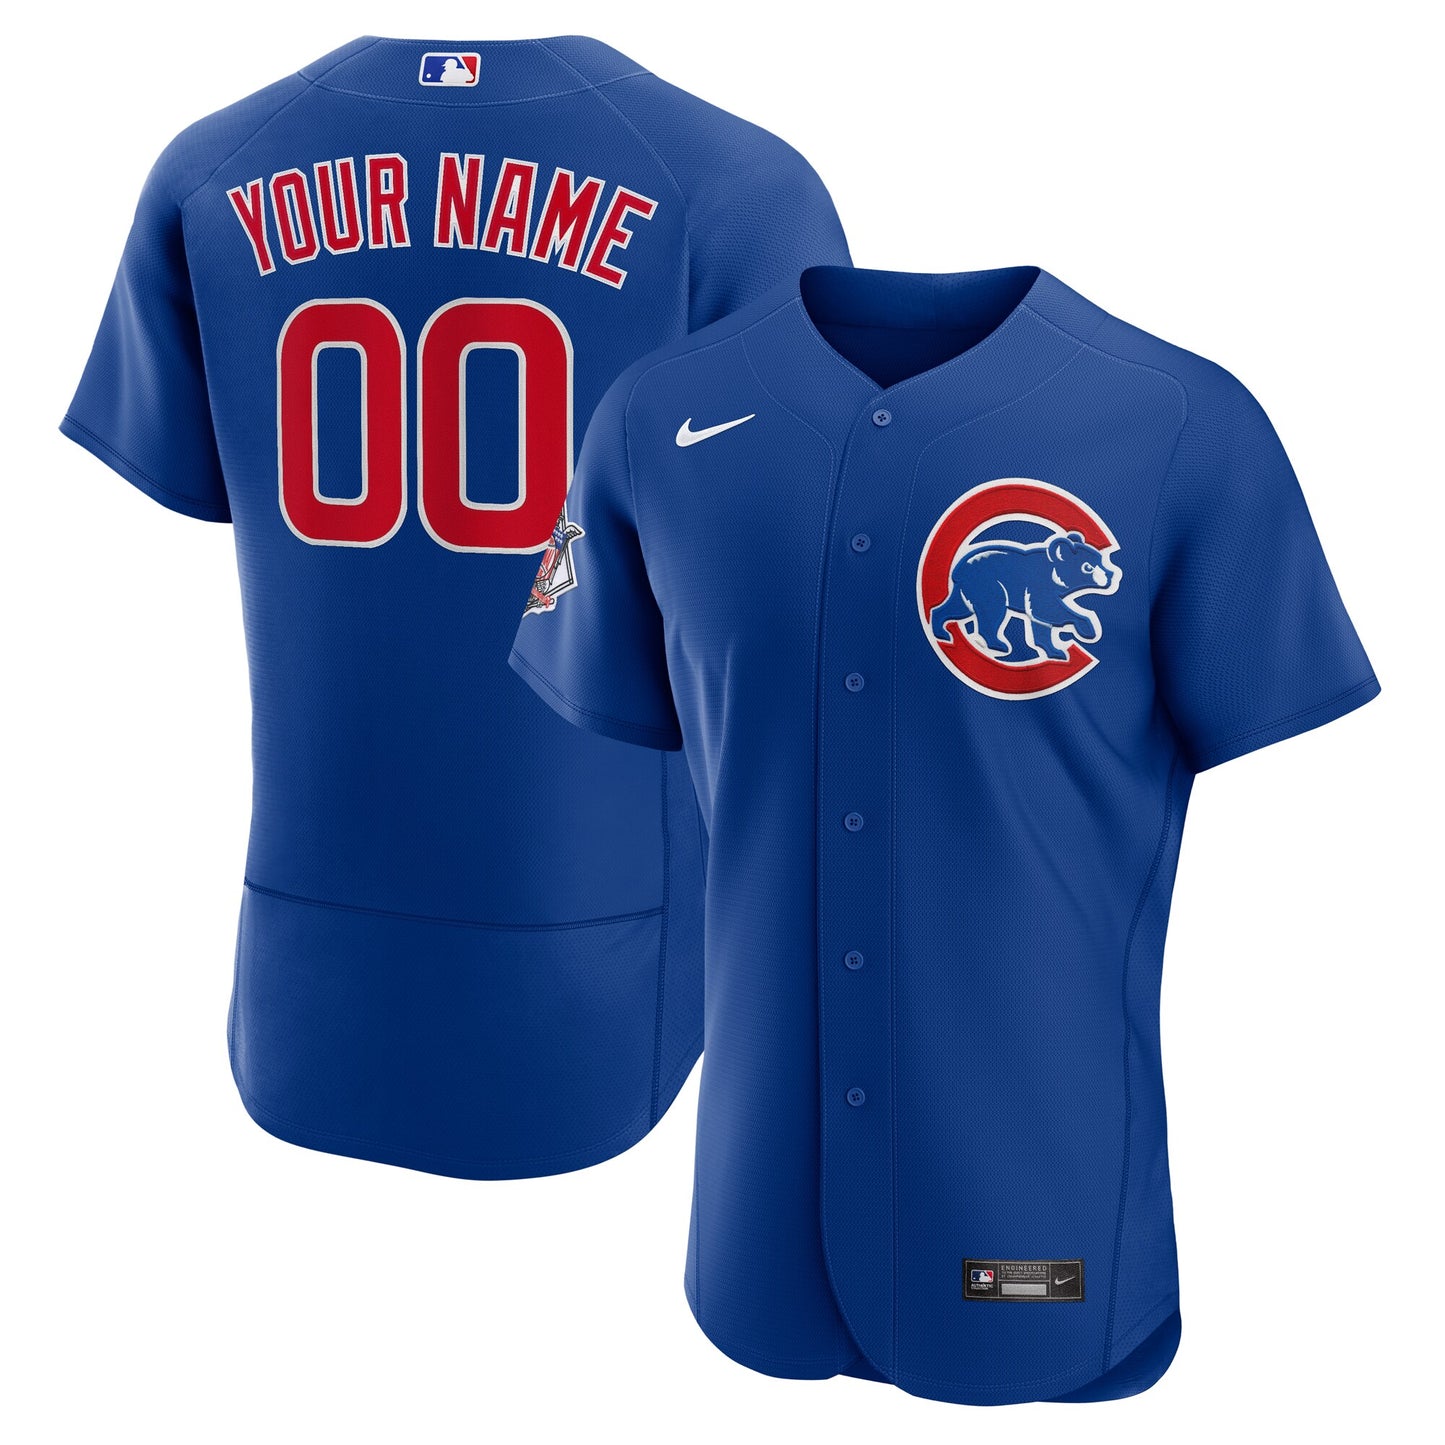 Chicago Cubs Nike Alternate Authentic Custom Jersey - Royal